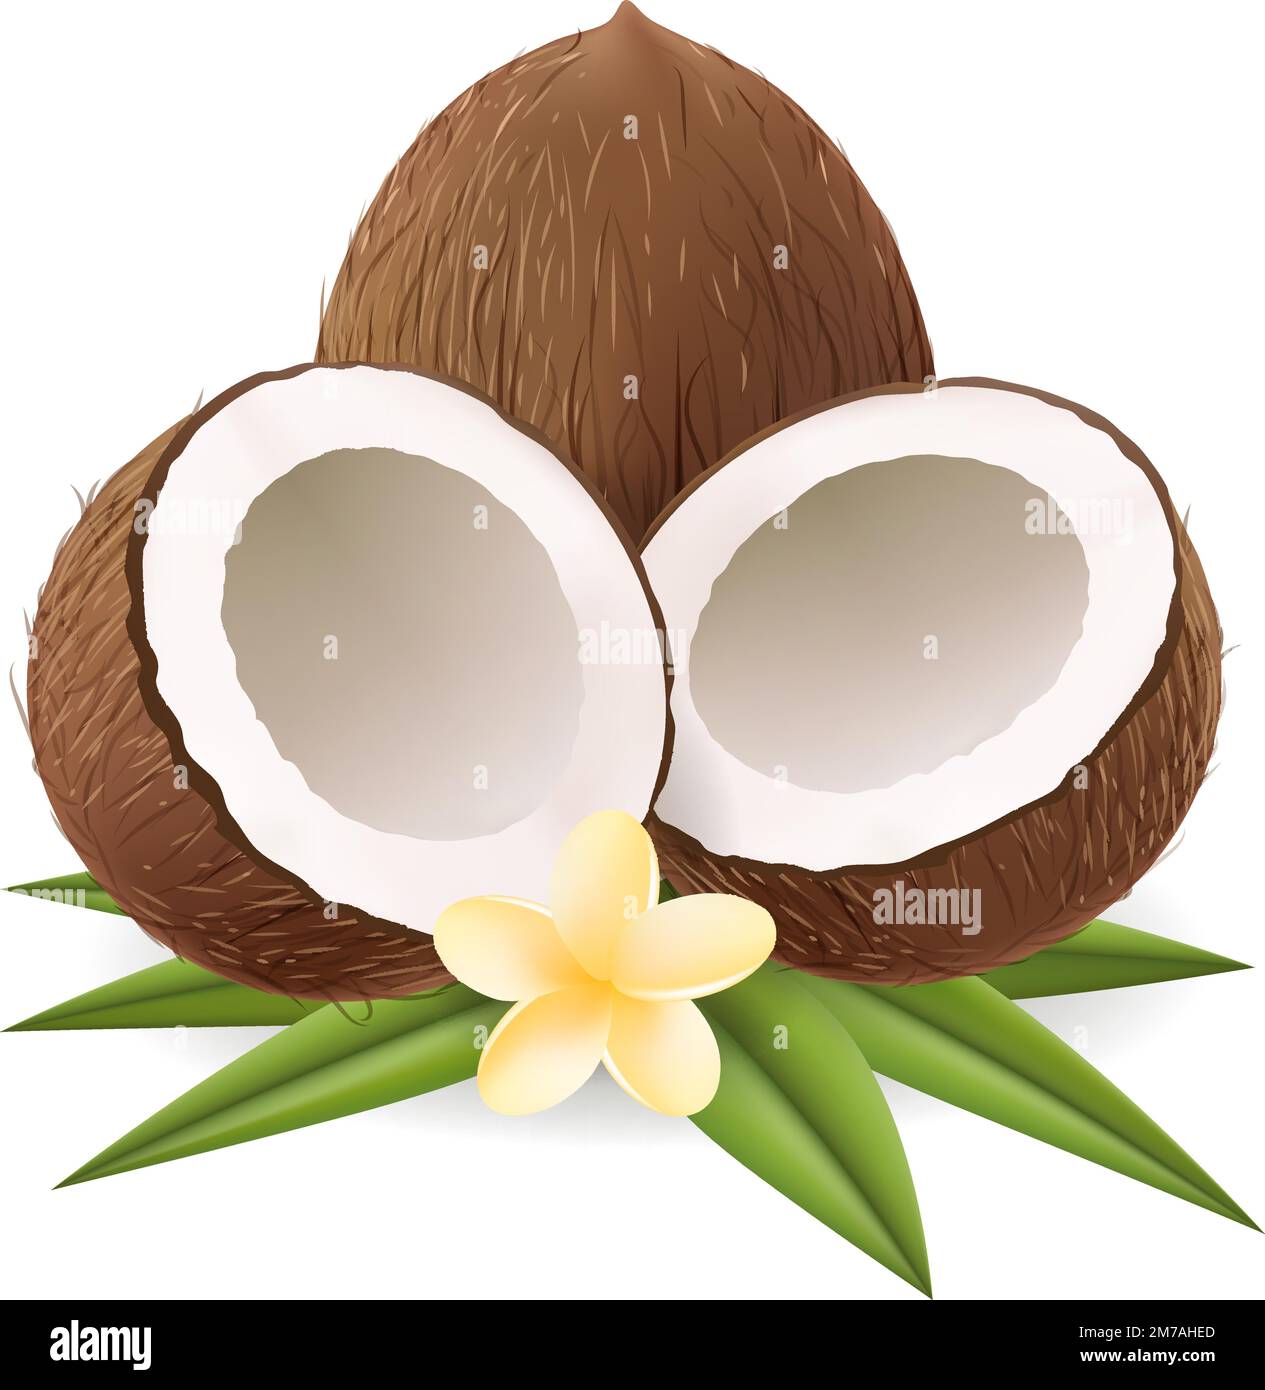 Realistic coconuts with leaves and flower Stock Vector